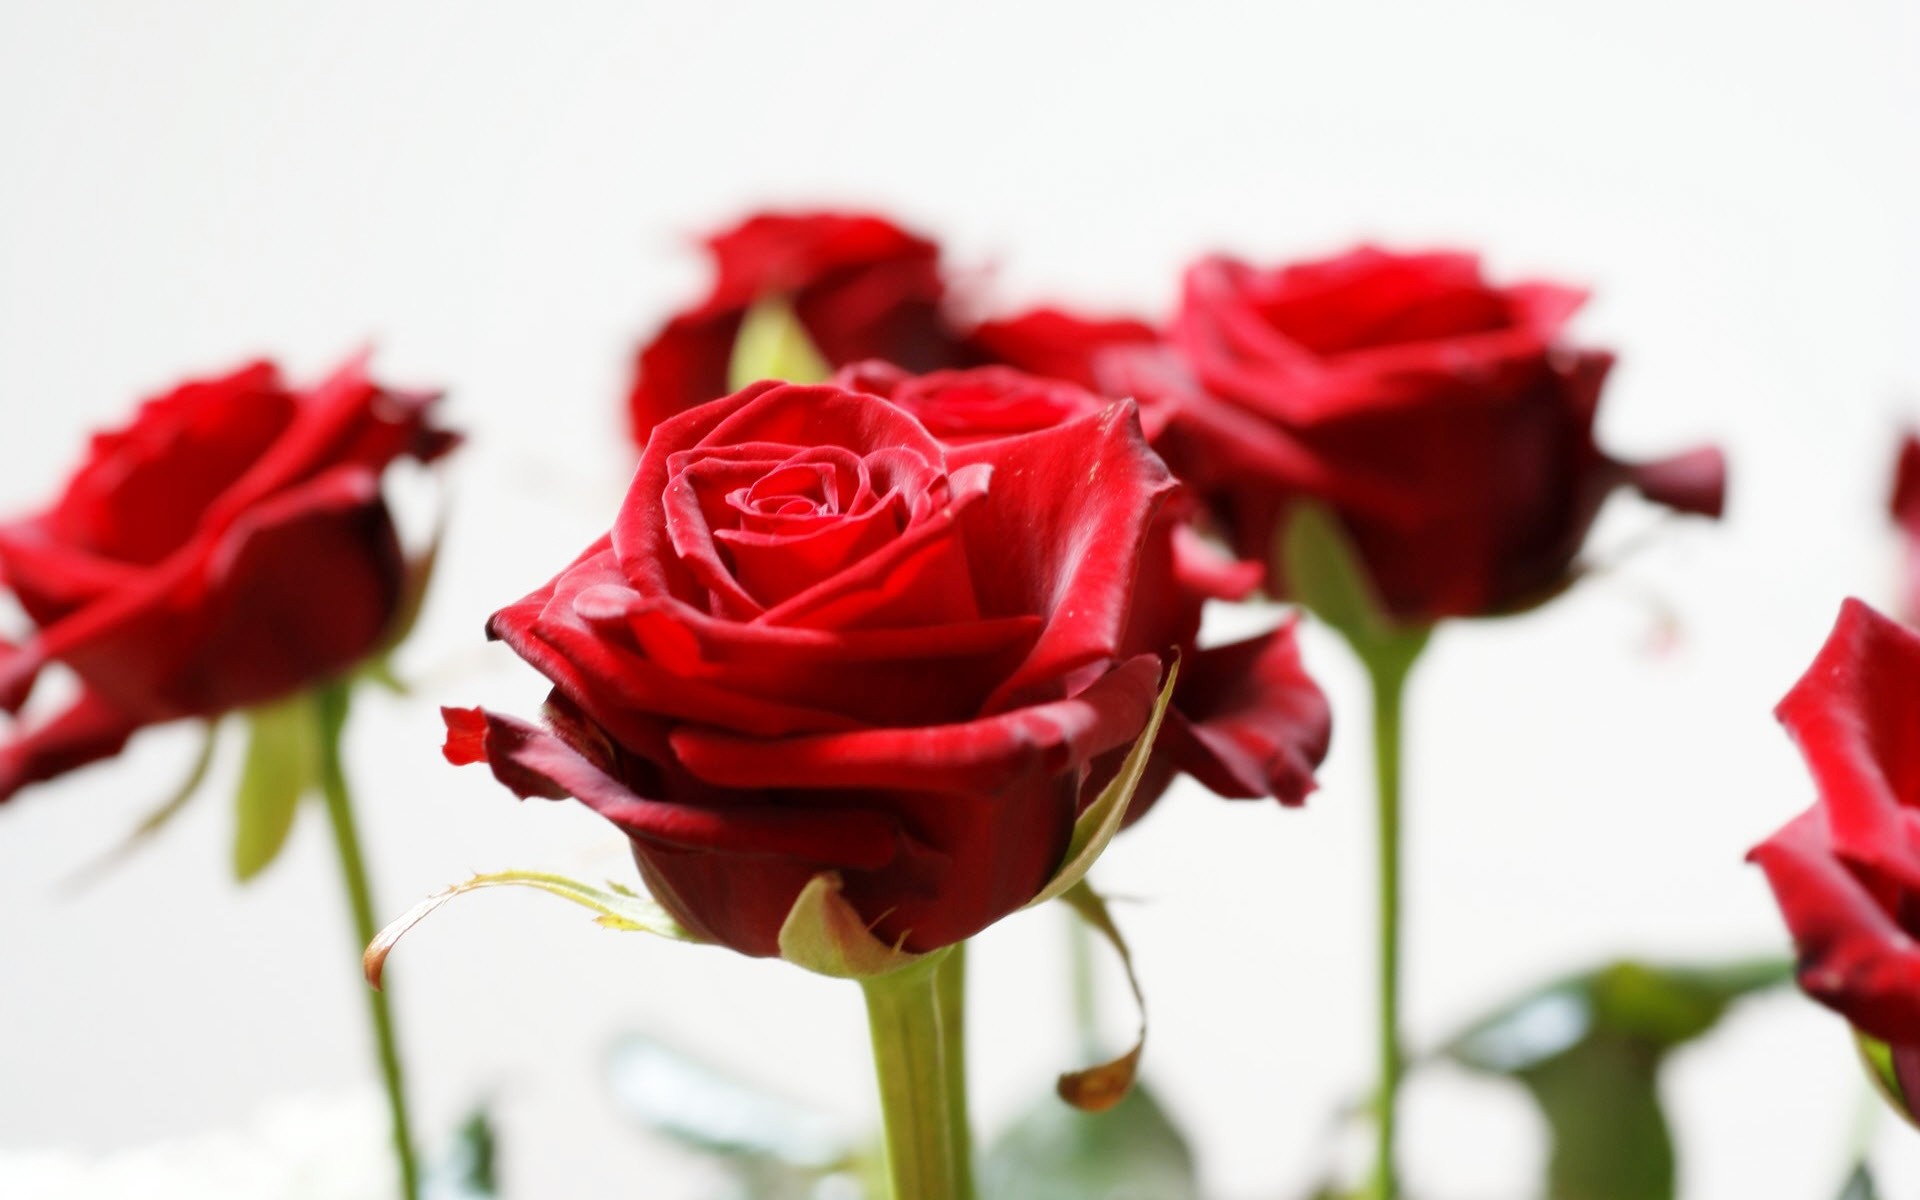 Red Roses Wallpaper Background Image